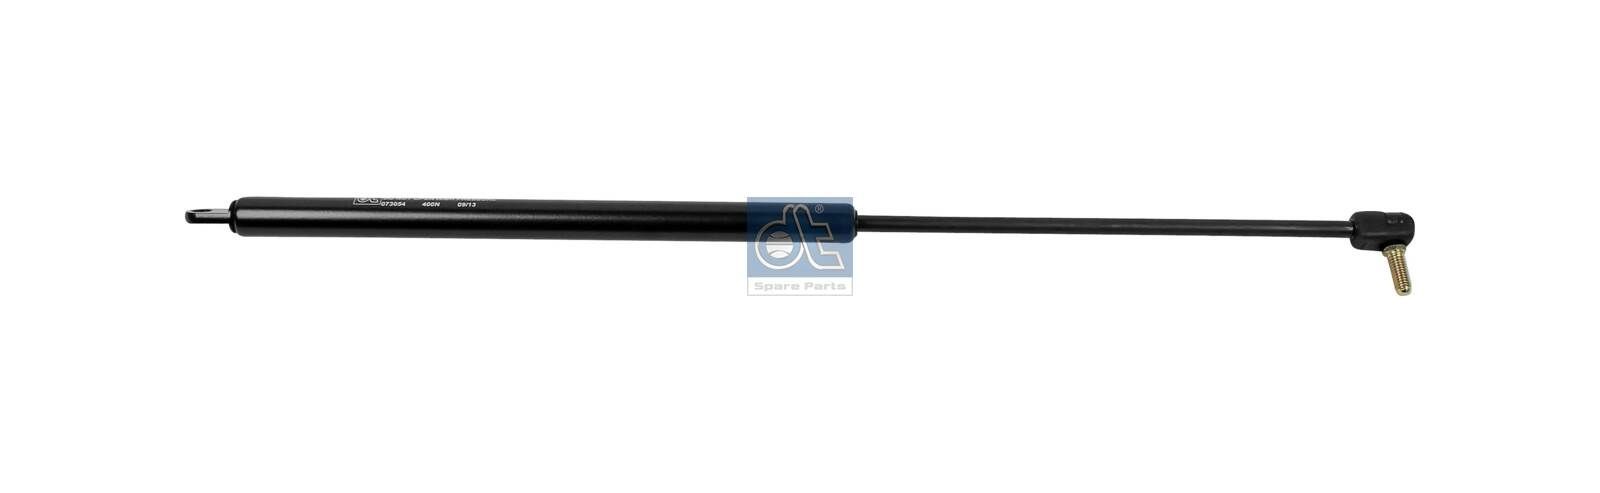 817228 DT Spare Parts 5.64125 Gas Spring 280 060